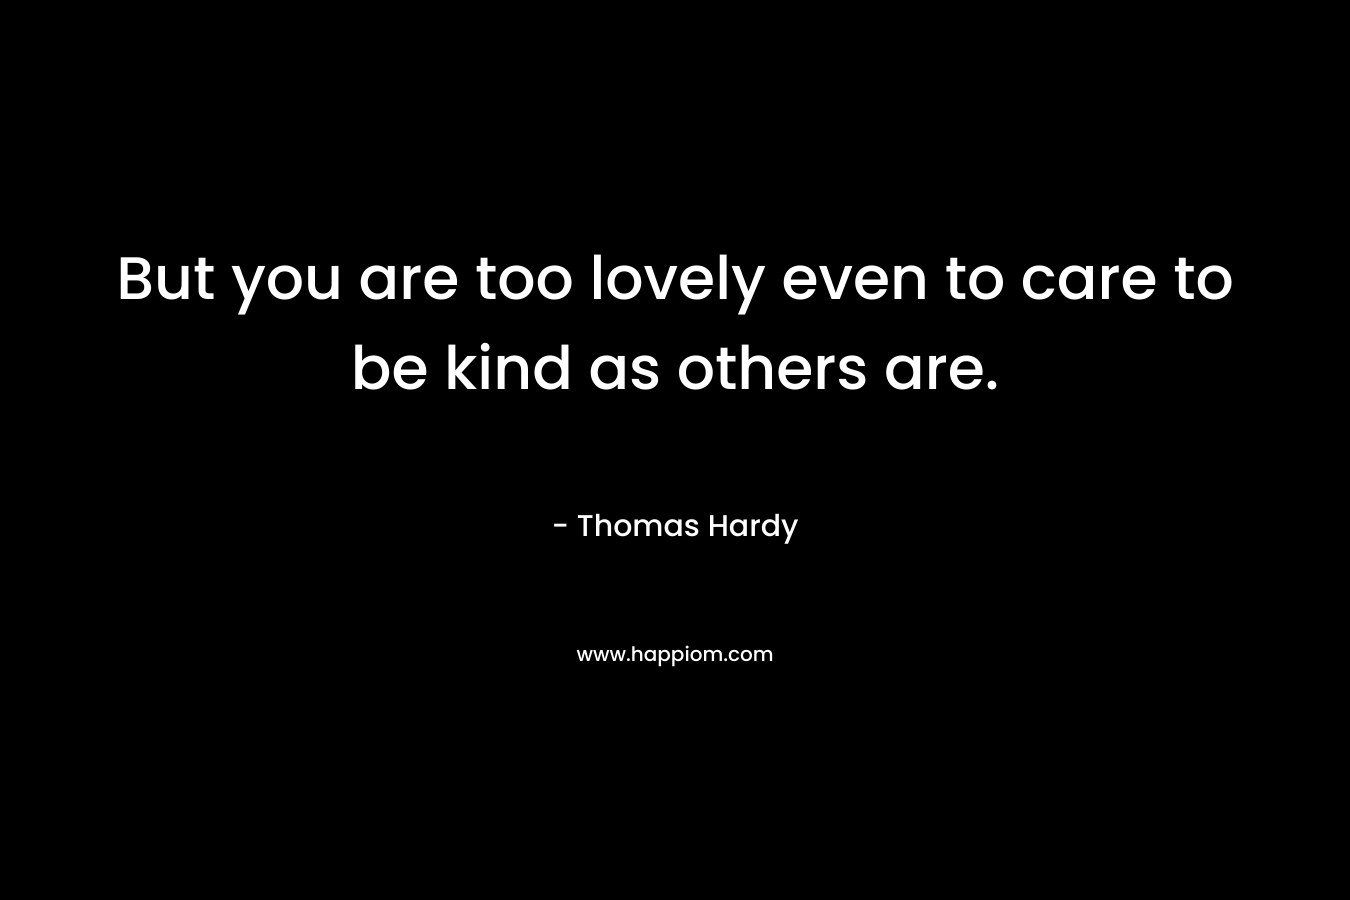 But you are too lovely even to care to be kind as others are.